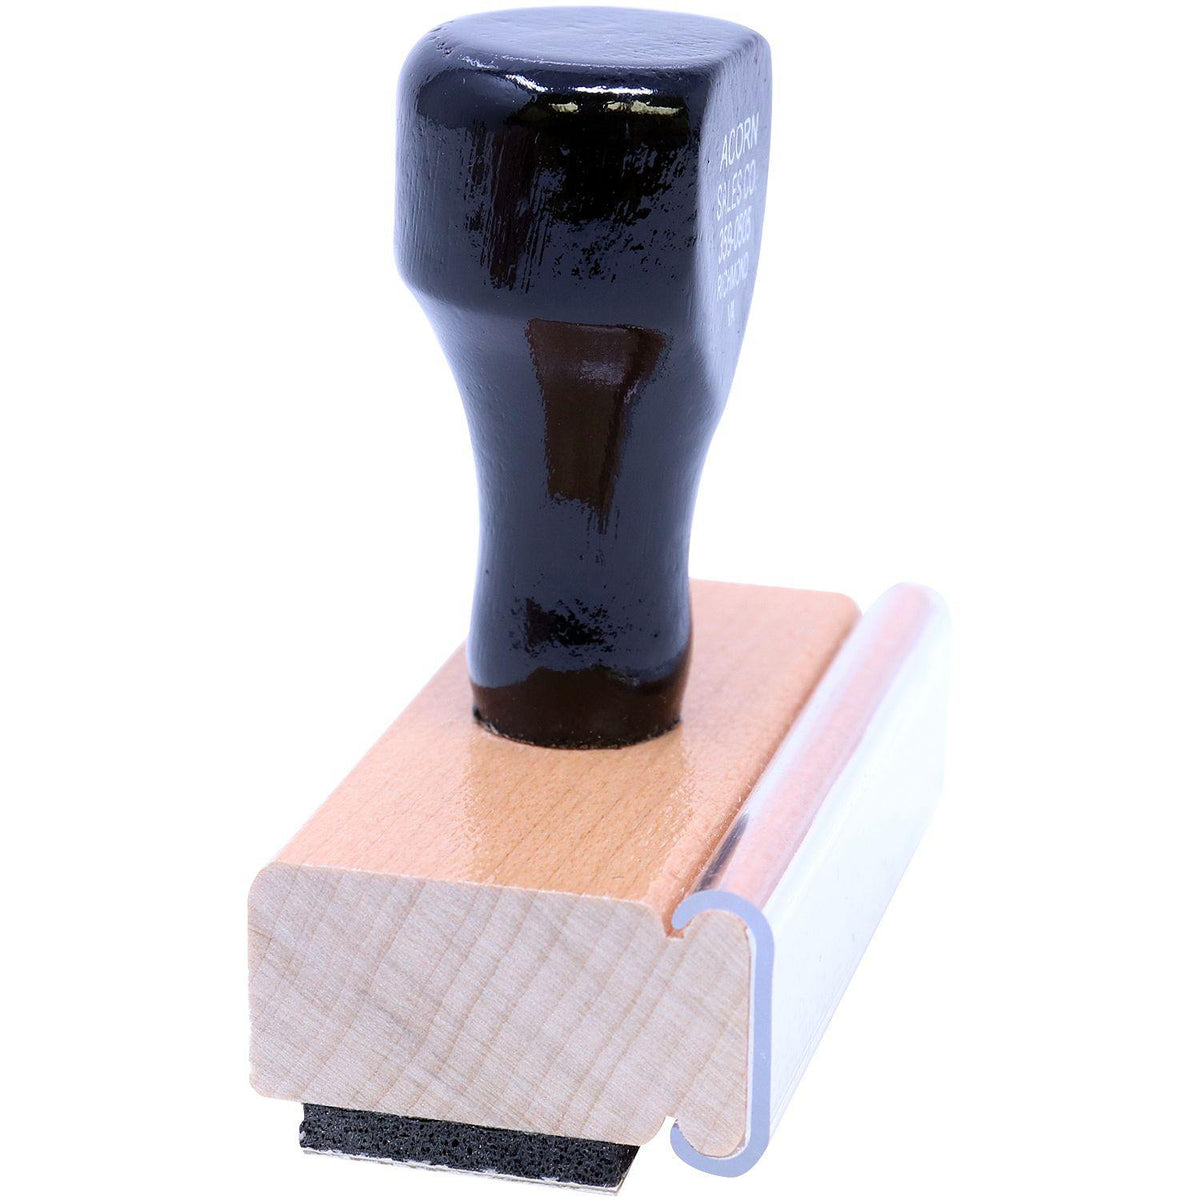 Side View of Appraisal Rubber Stamp at an Angle